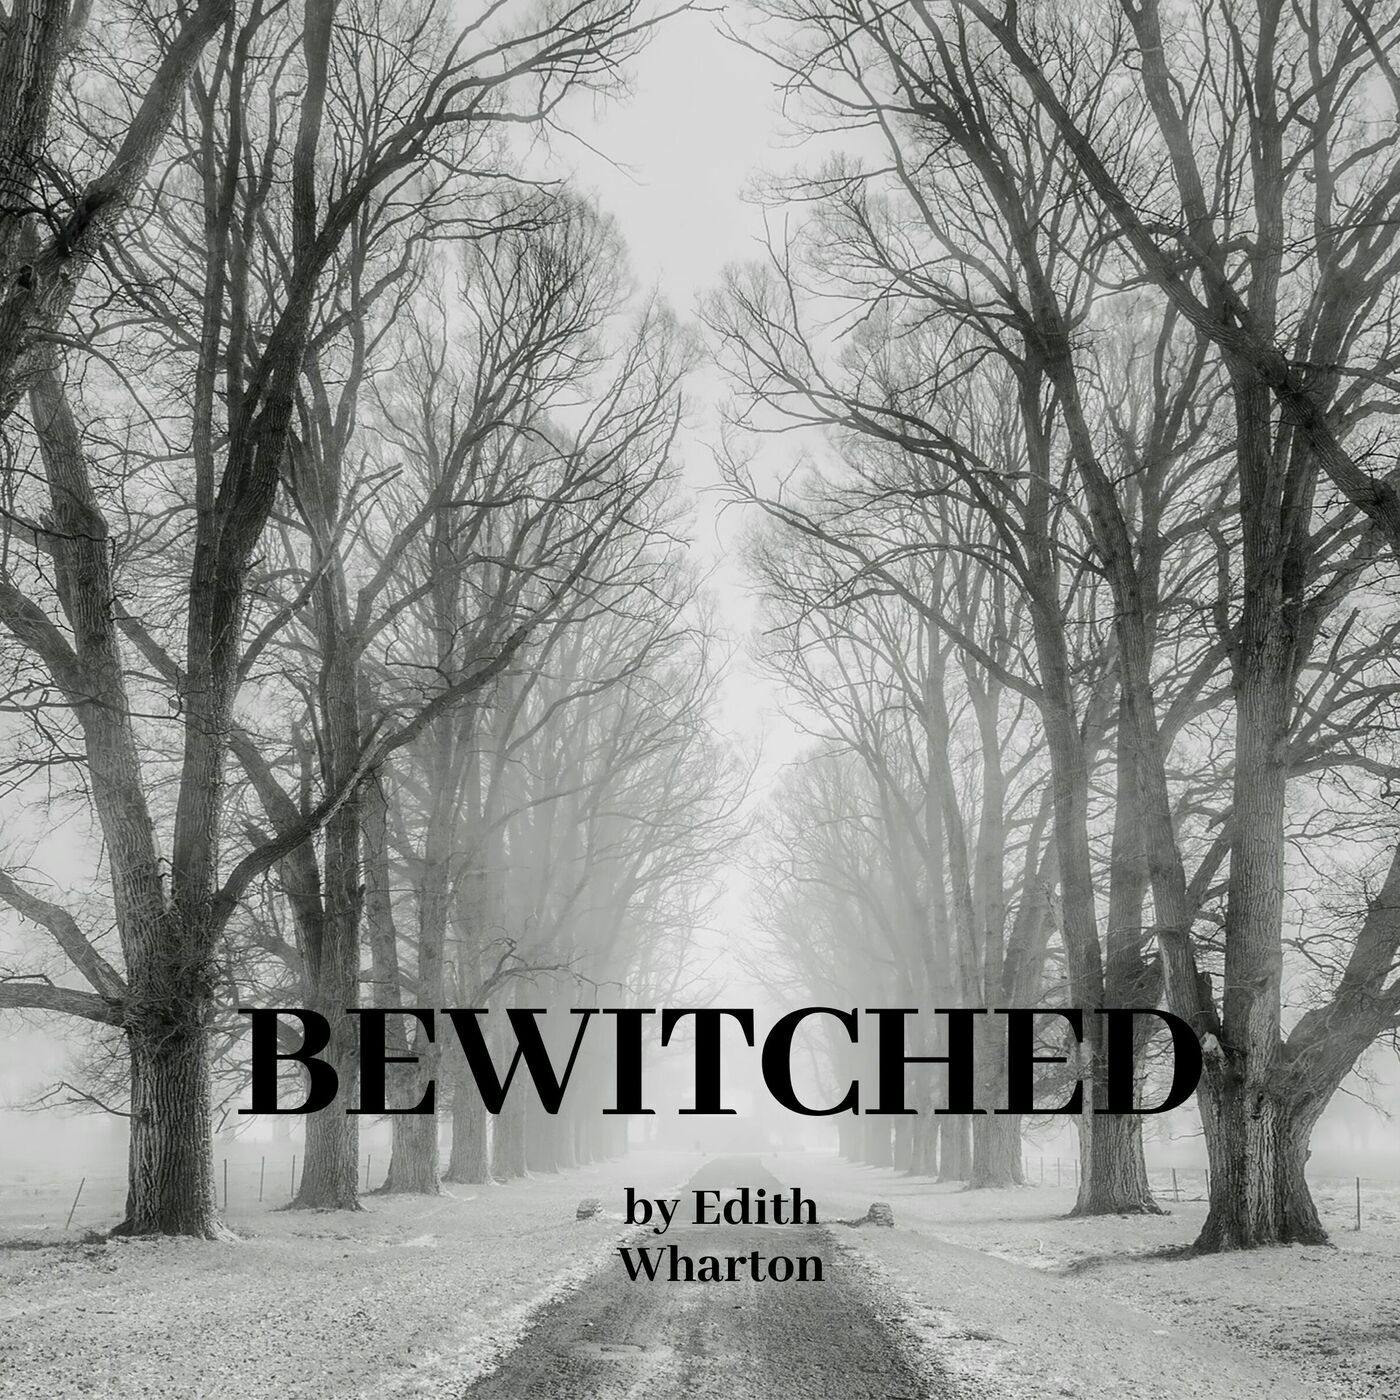 Episode 4: Bewitched by Edith Wharton